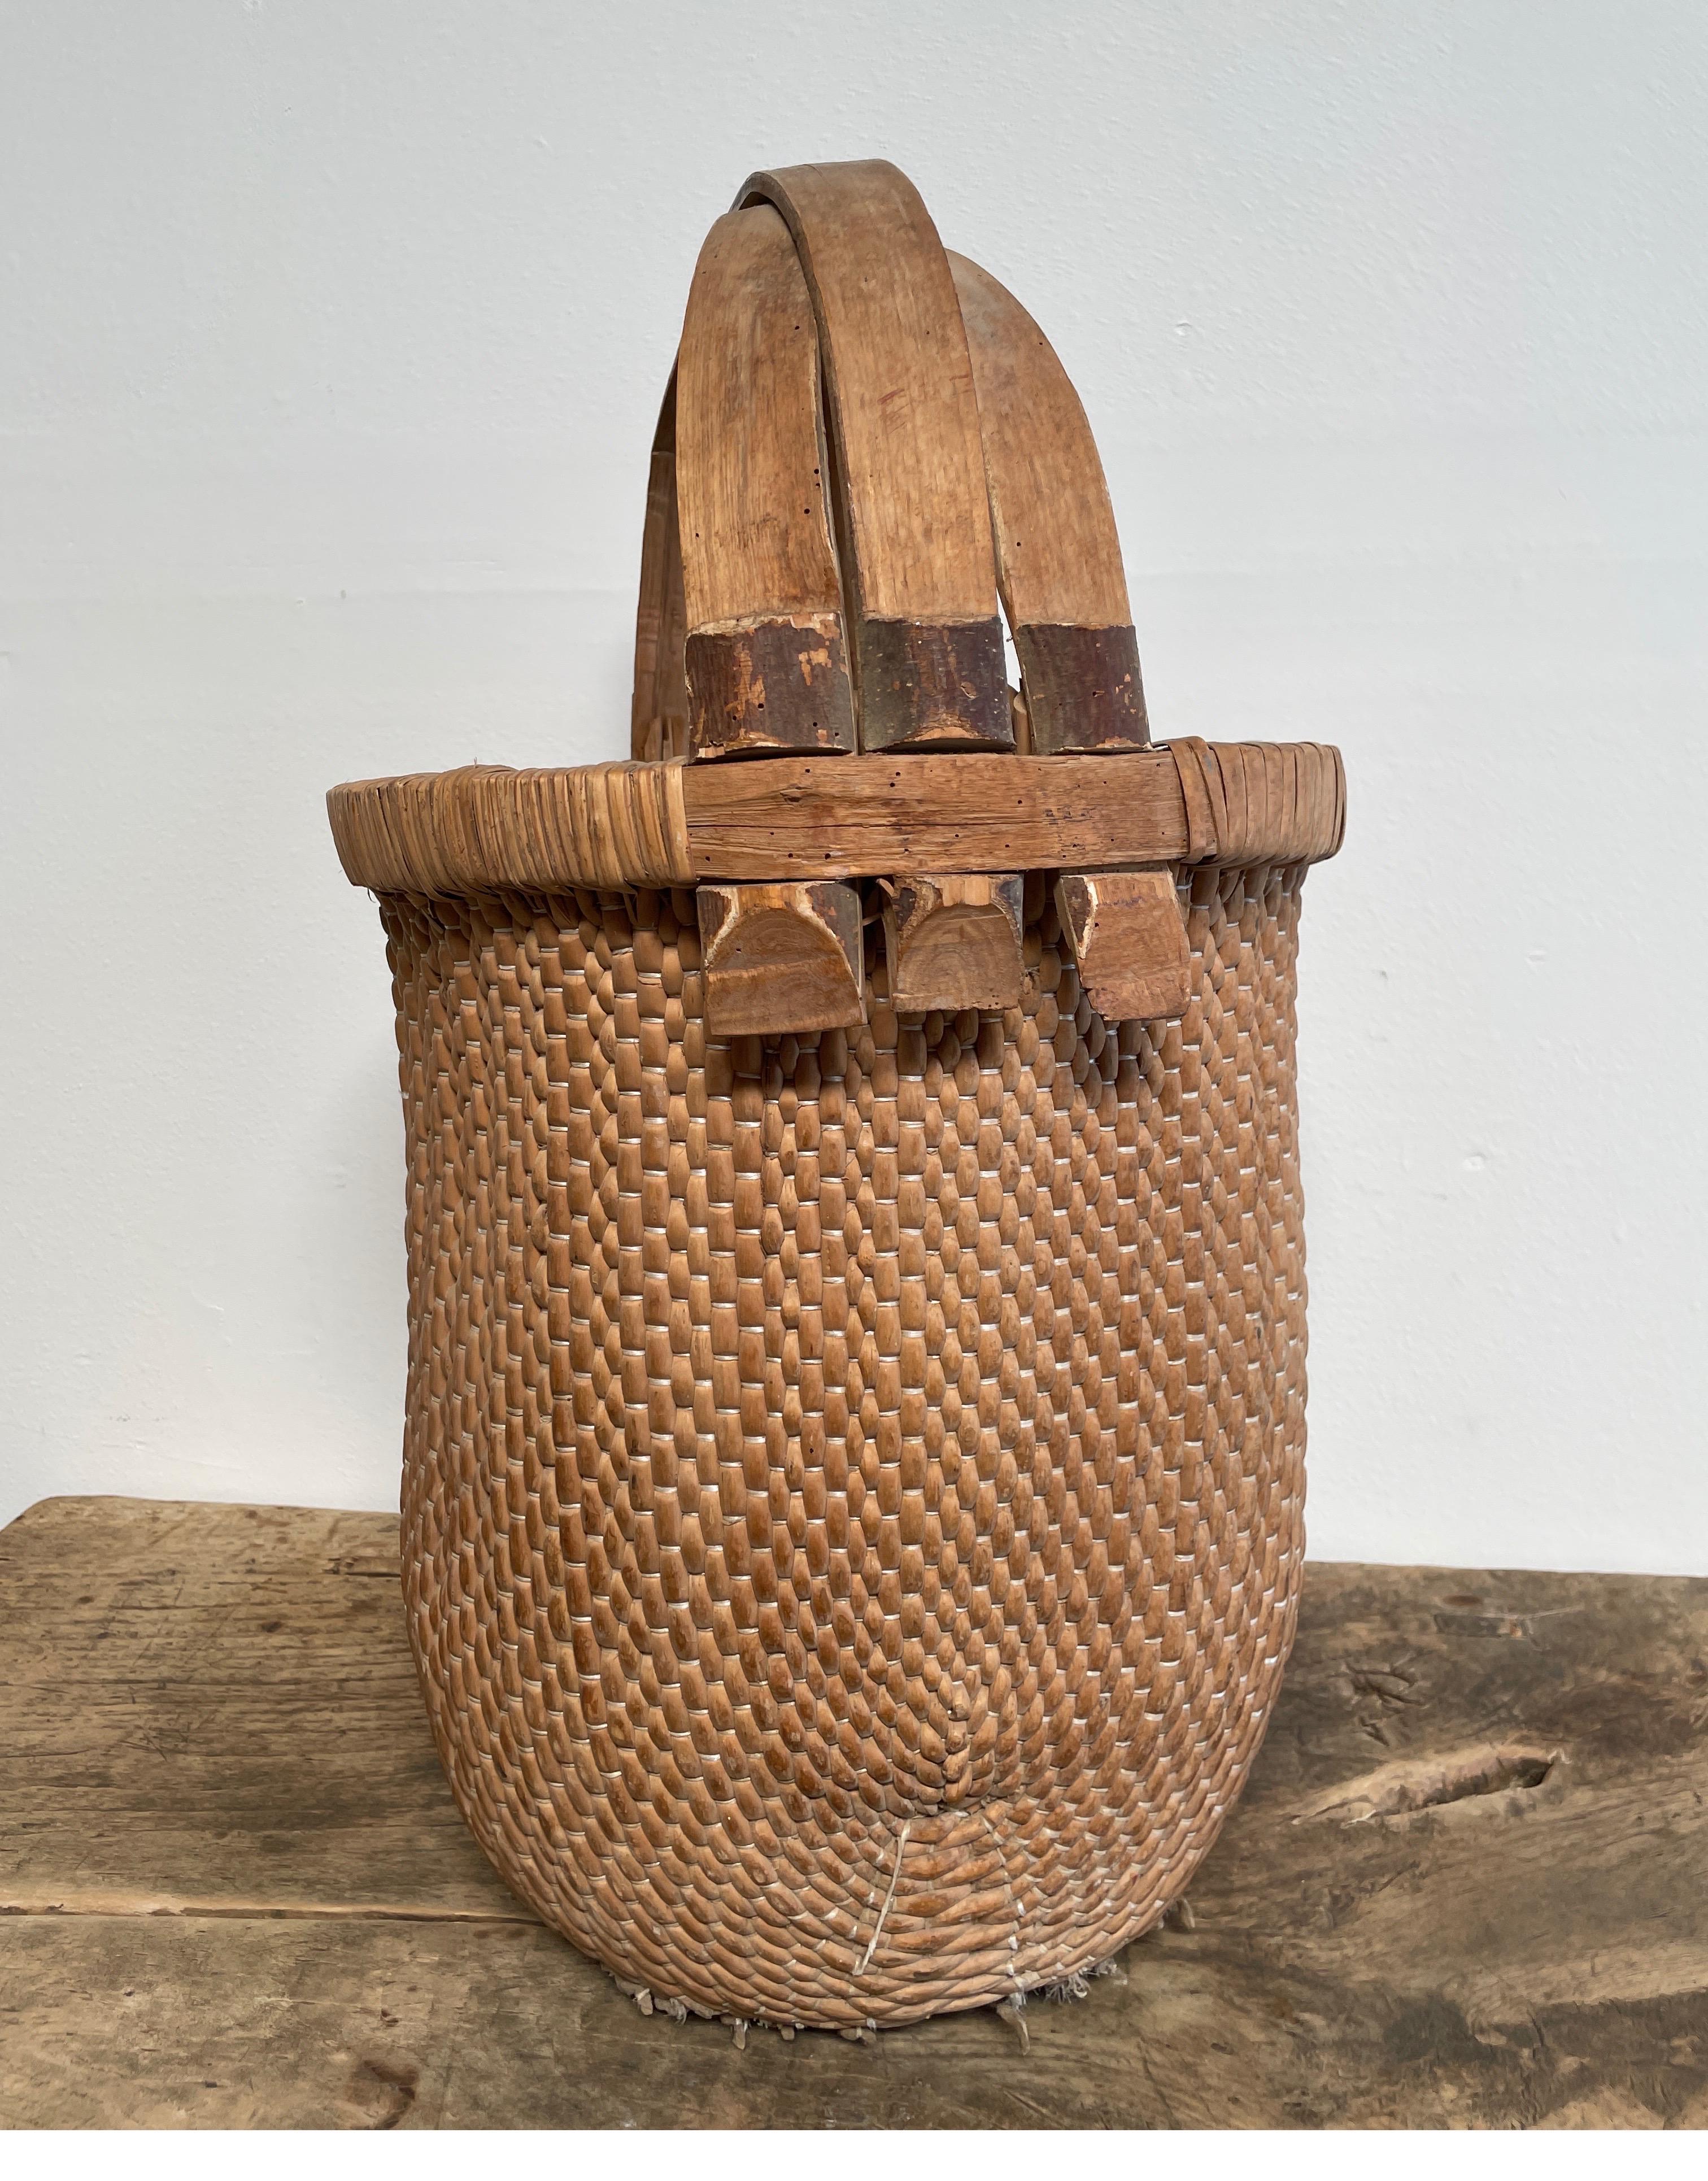 Vintage woven Asian basket with handle
Natural color, size 16” x 16” x 24”.